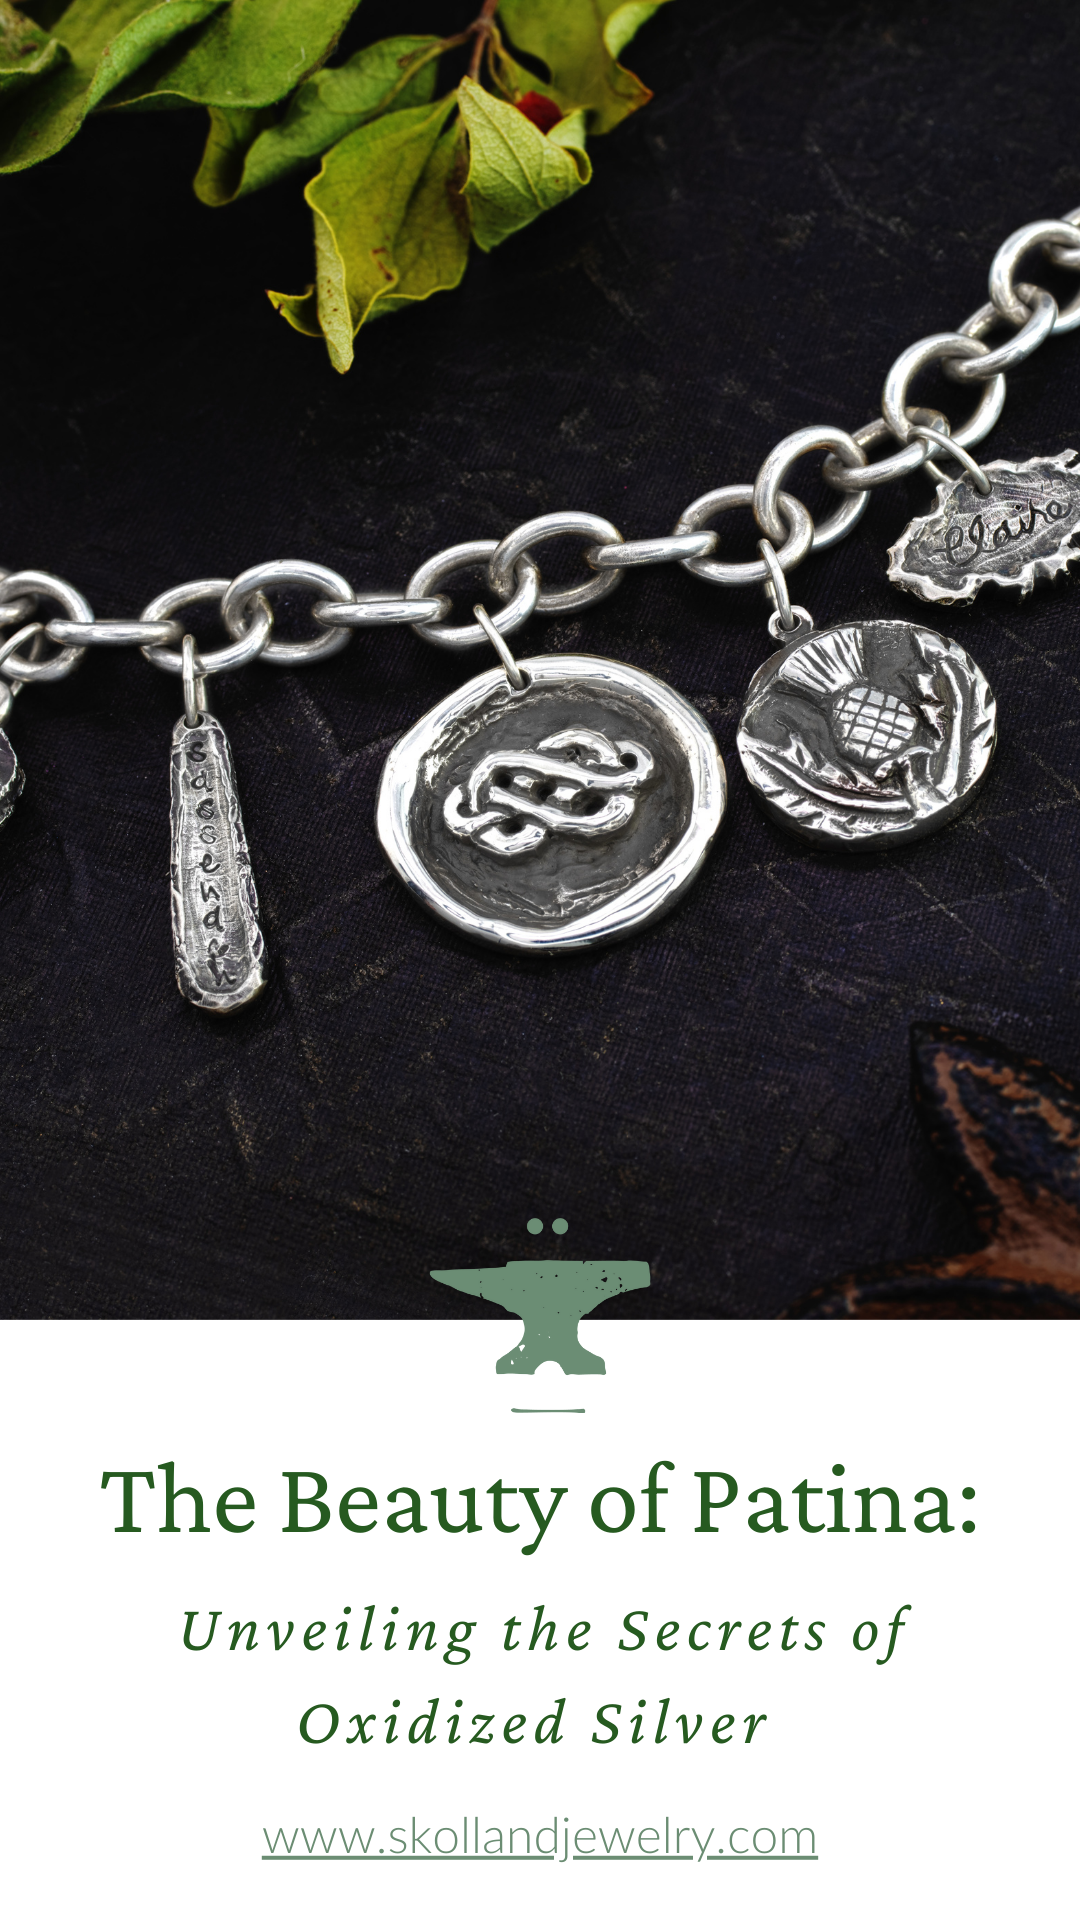 handcrafted darkened sterling silver charms with celtic, thistle & sassenach motifs on a silver chain bracelet. Below the picture reads " The Beauty of Patina: Unveiling the Secrets of Oxidized Silver and how-to care for your darkened jewels"